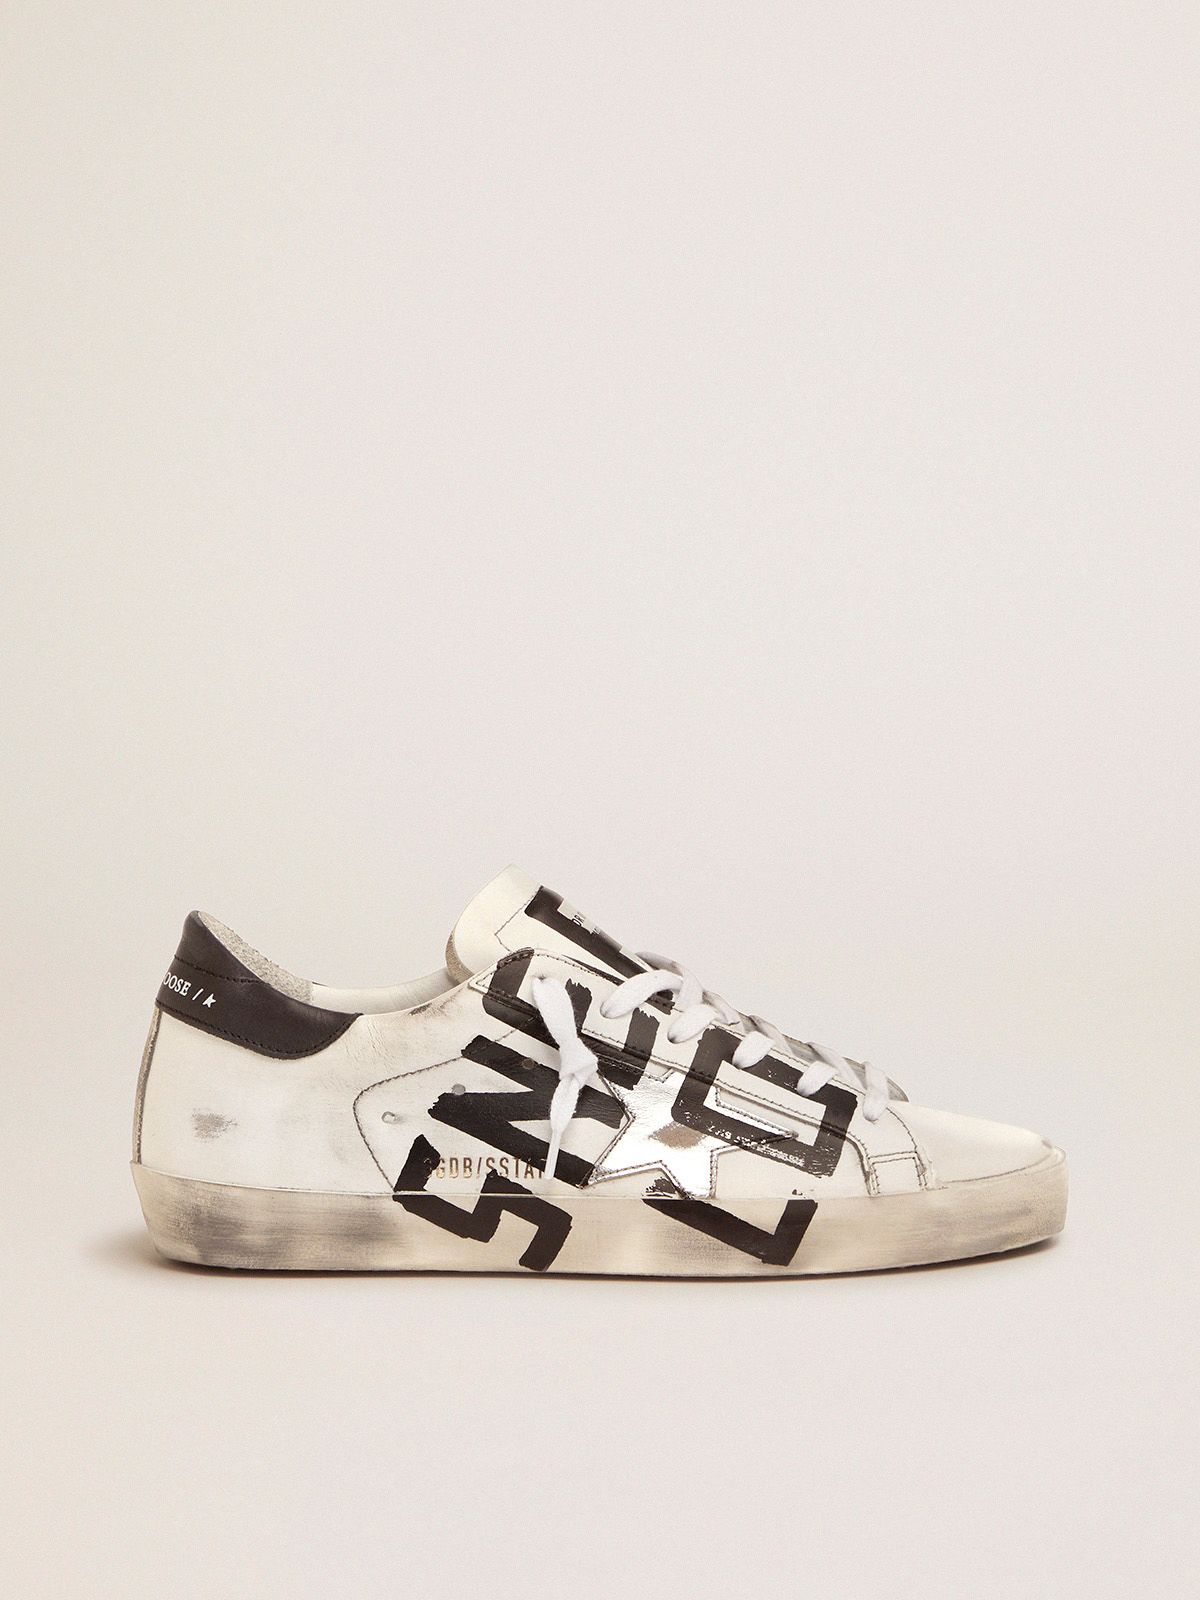 Super-Star sneakers with Sneakers Lover print